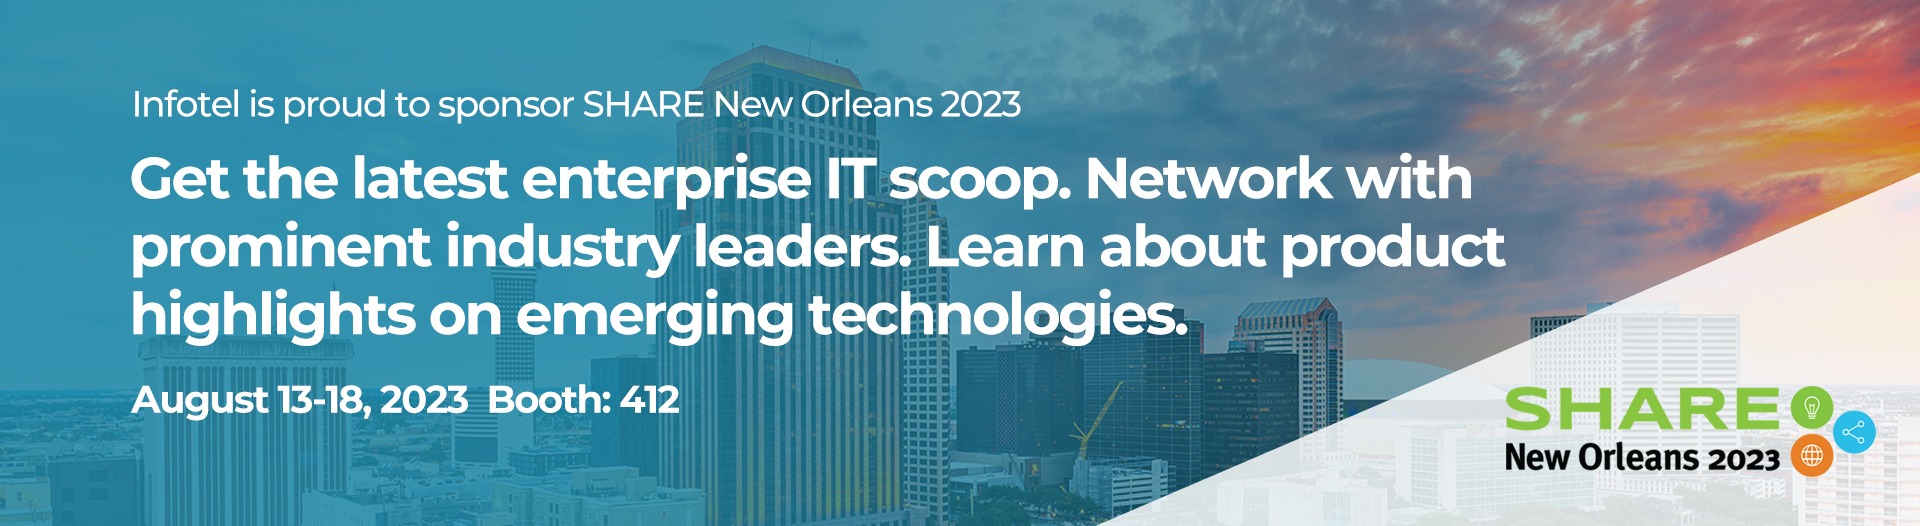 Infotel SHARE New Orleans 2023 Event Banner